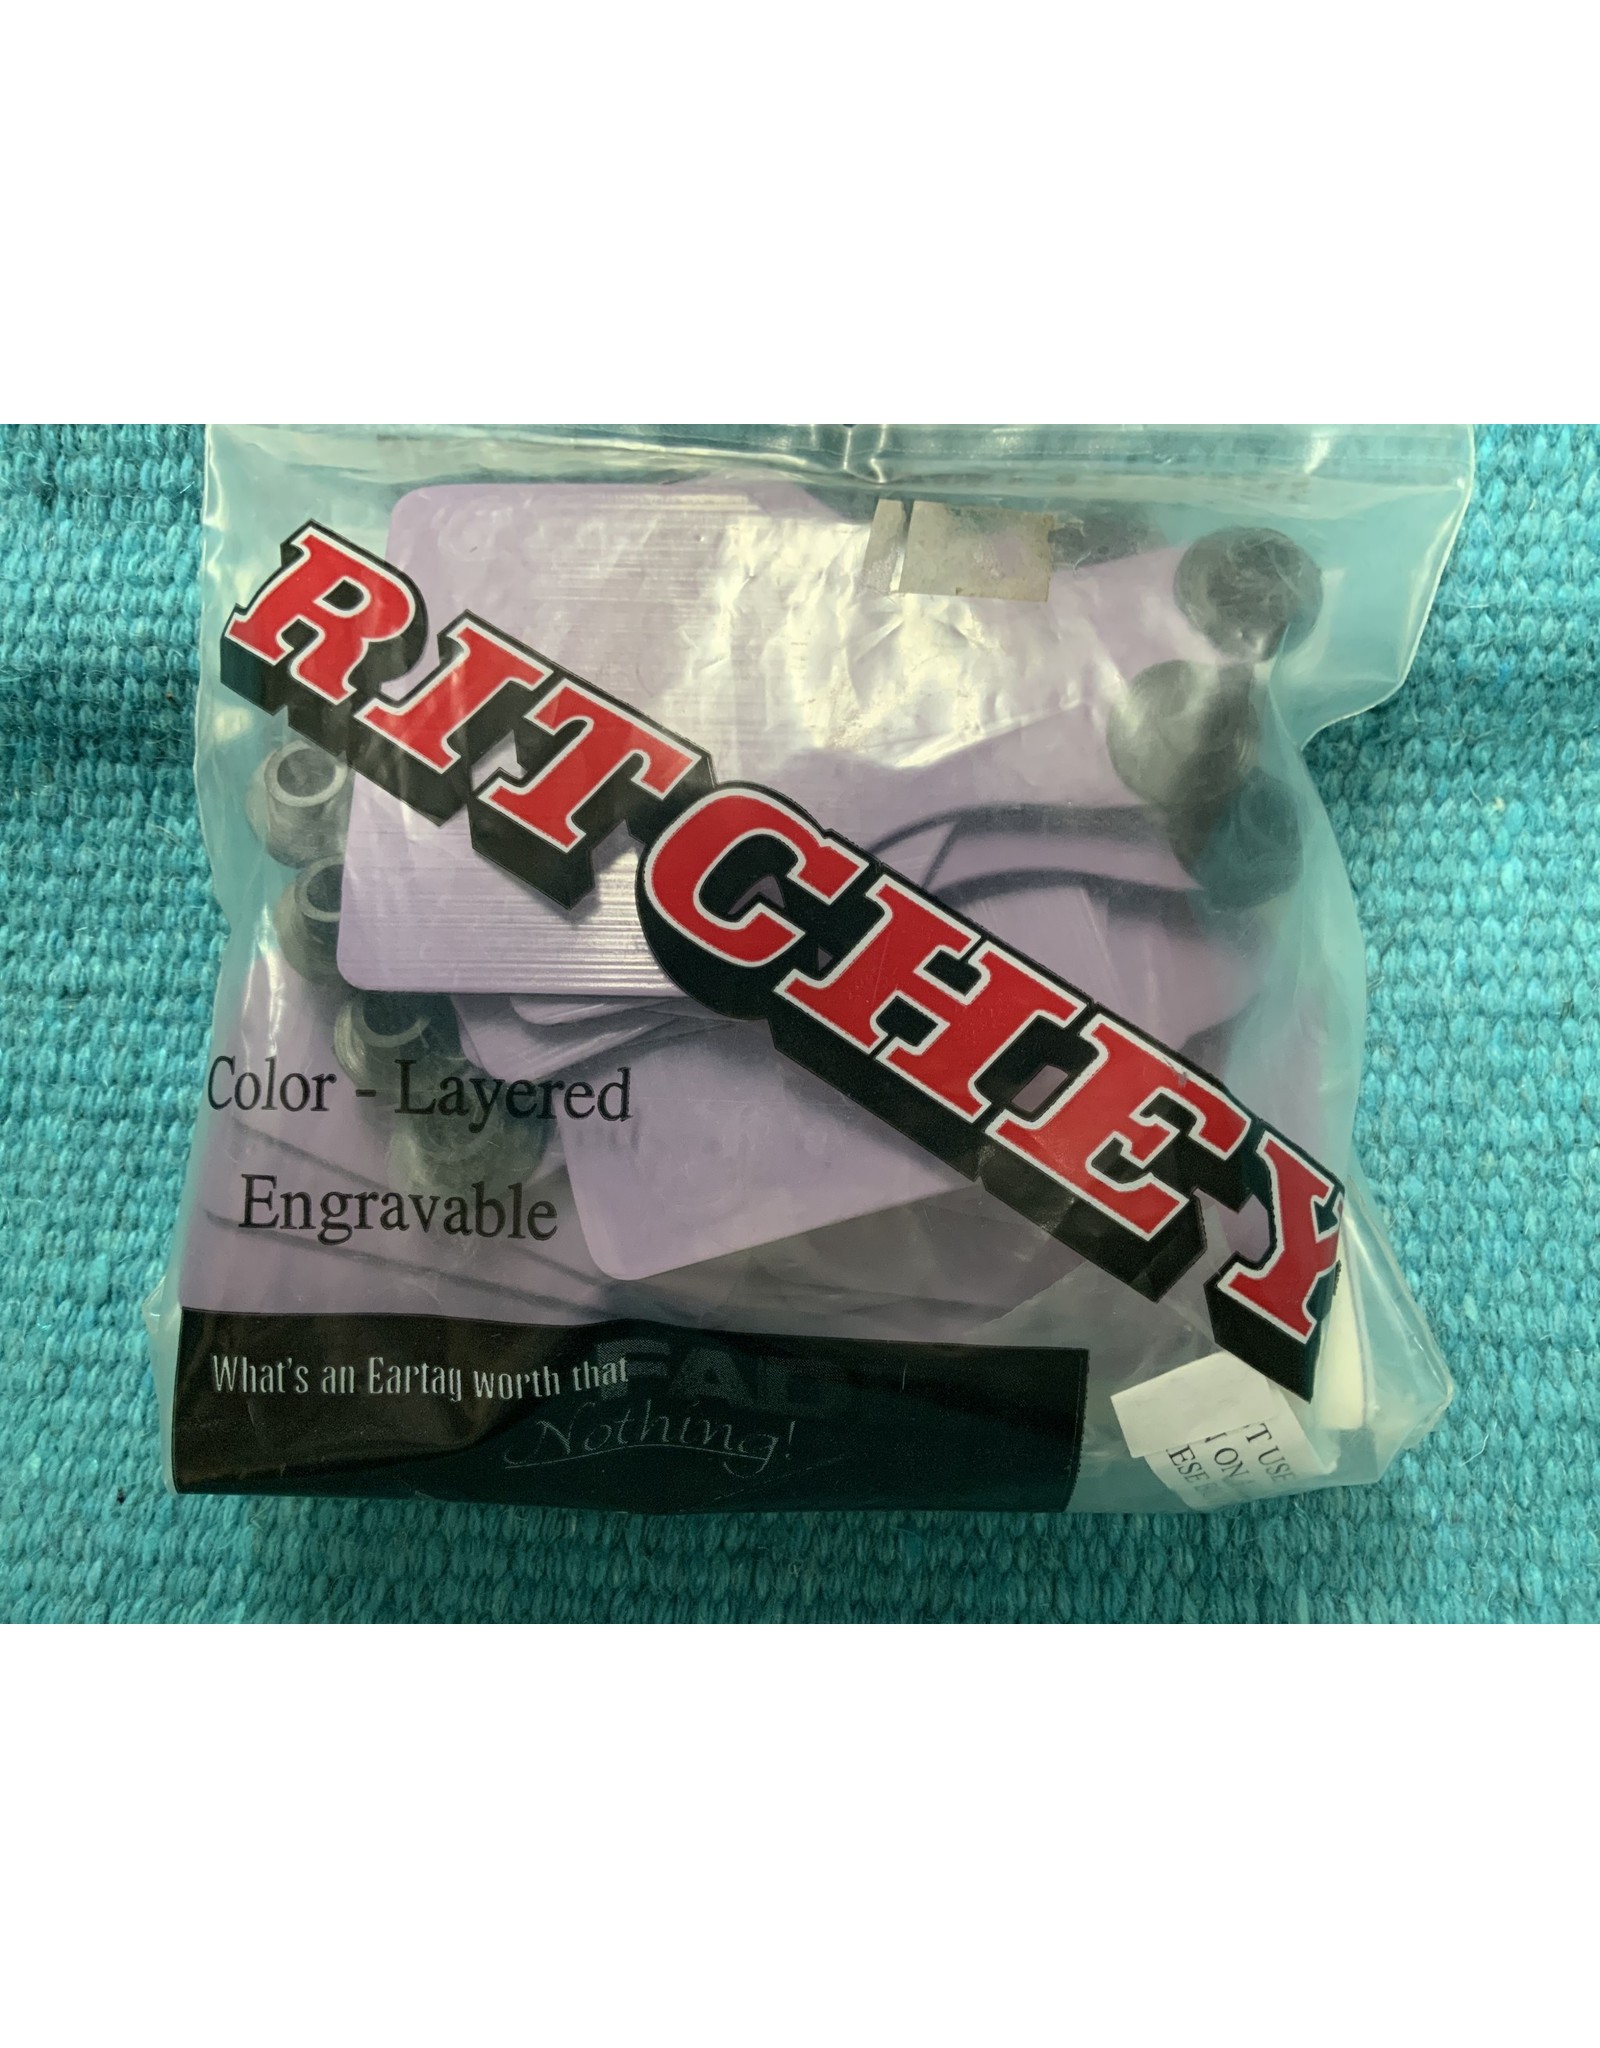 Ritchey TAG* Ritchey - Universal Large- Purple/Black 25pk ***Discontinued**** w/Buttons